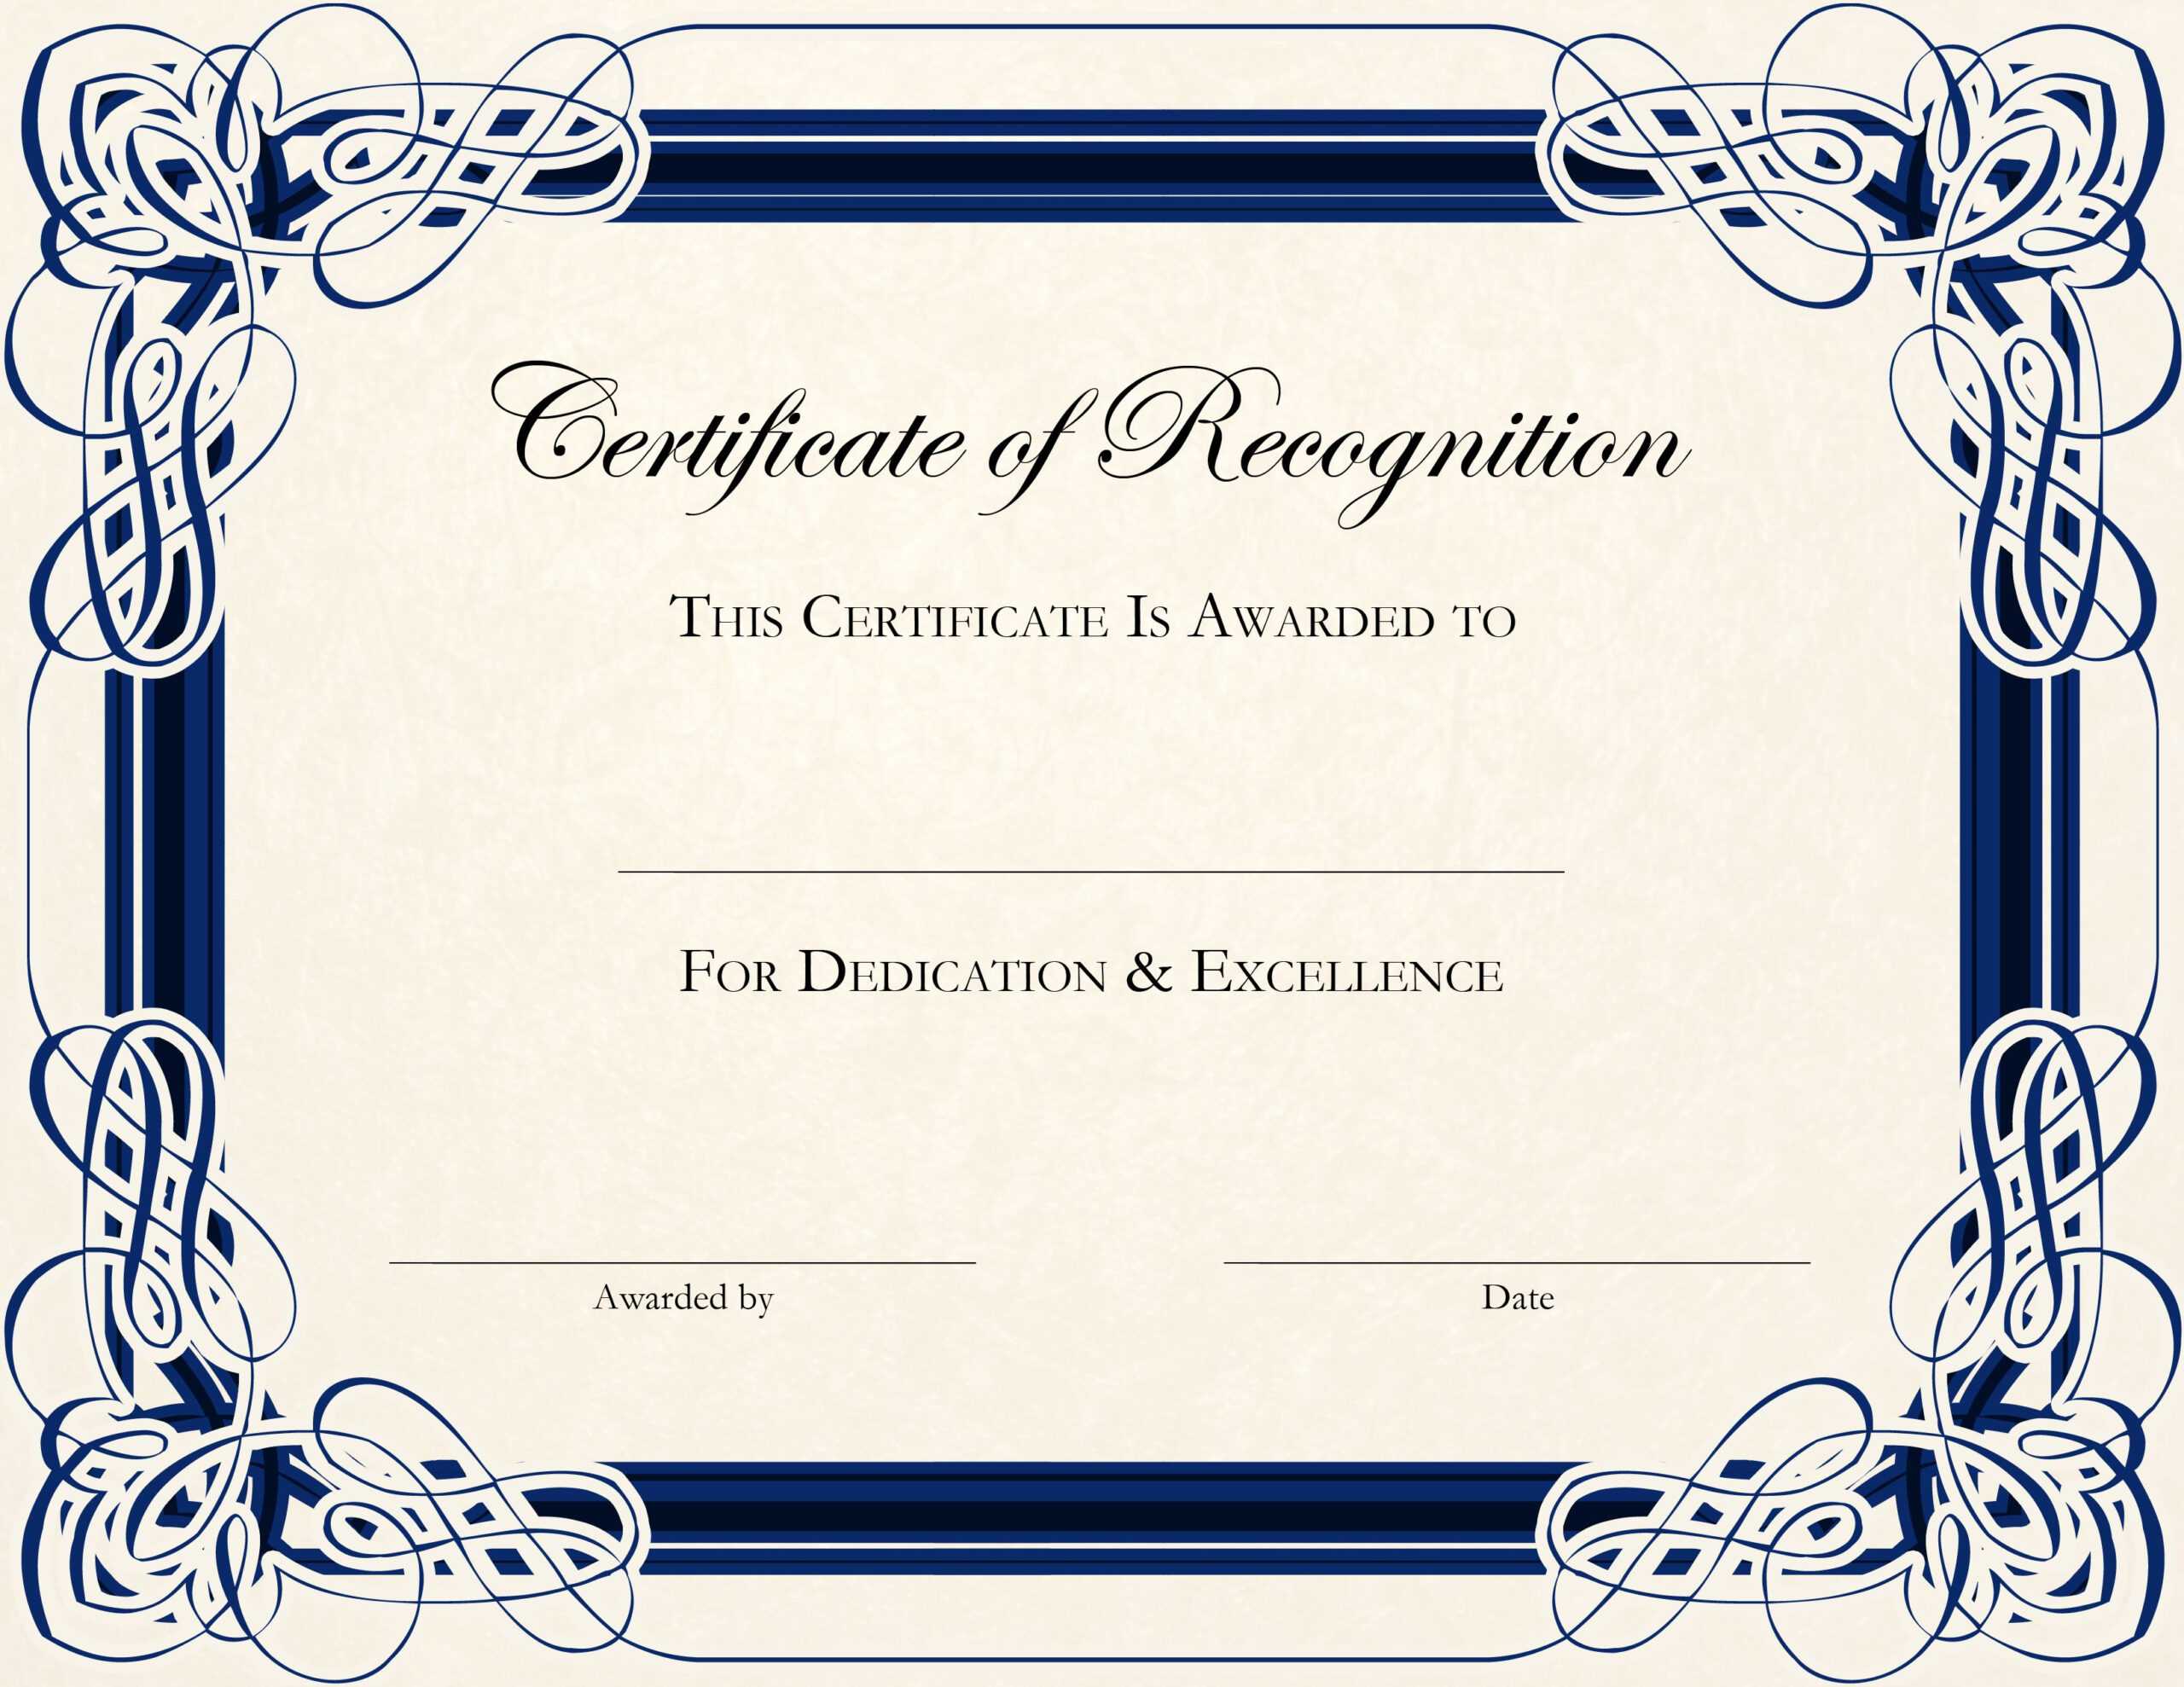 Certificate Of Appreciation Template Word Doc – Calep Pertaining To Template For Certificate Of Appreciation In Microsoft Word